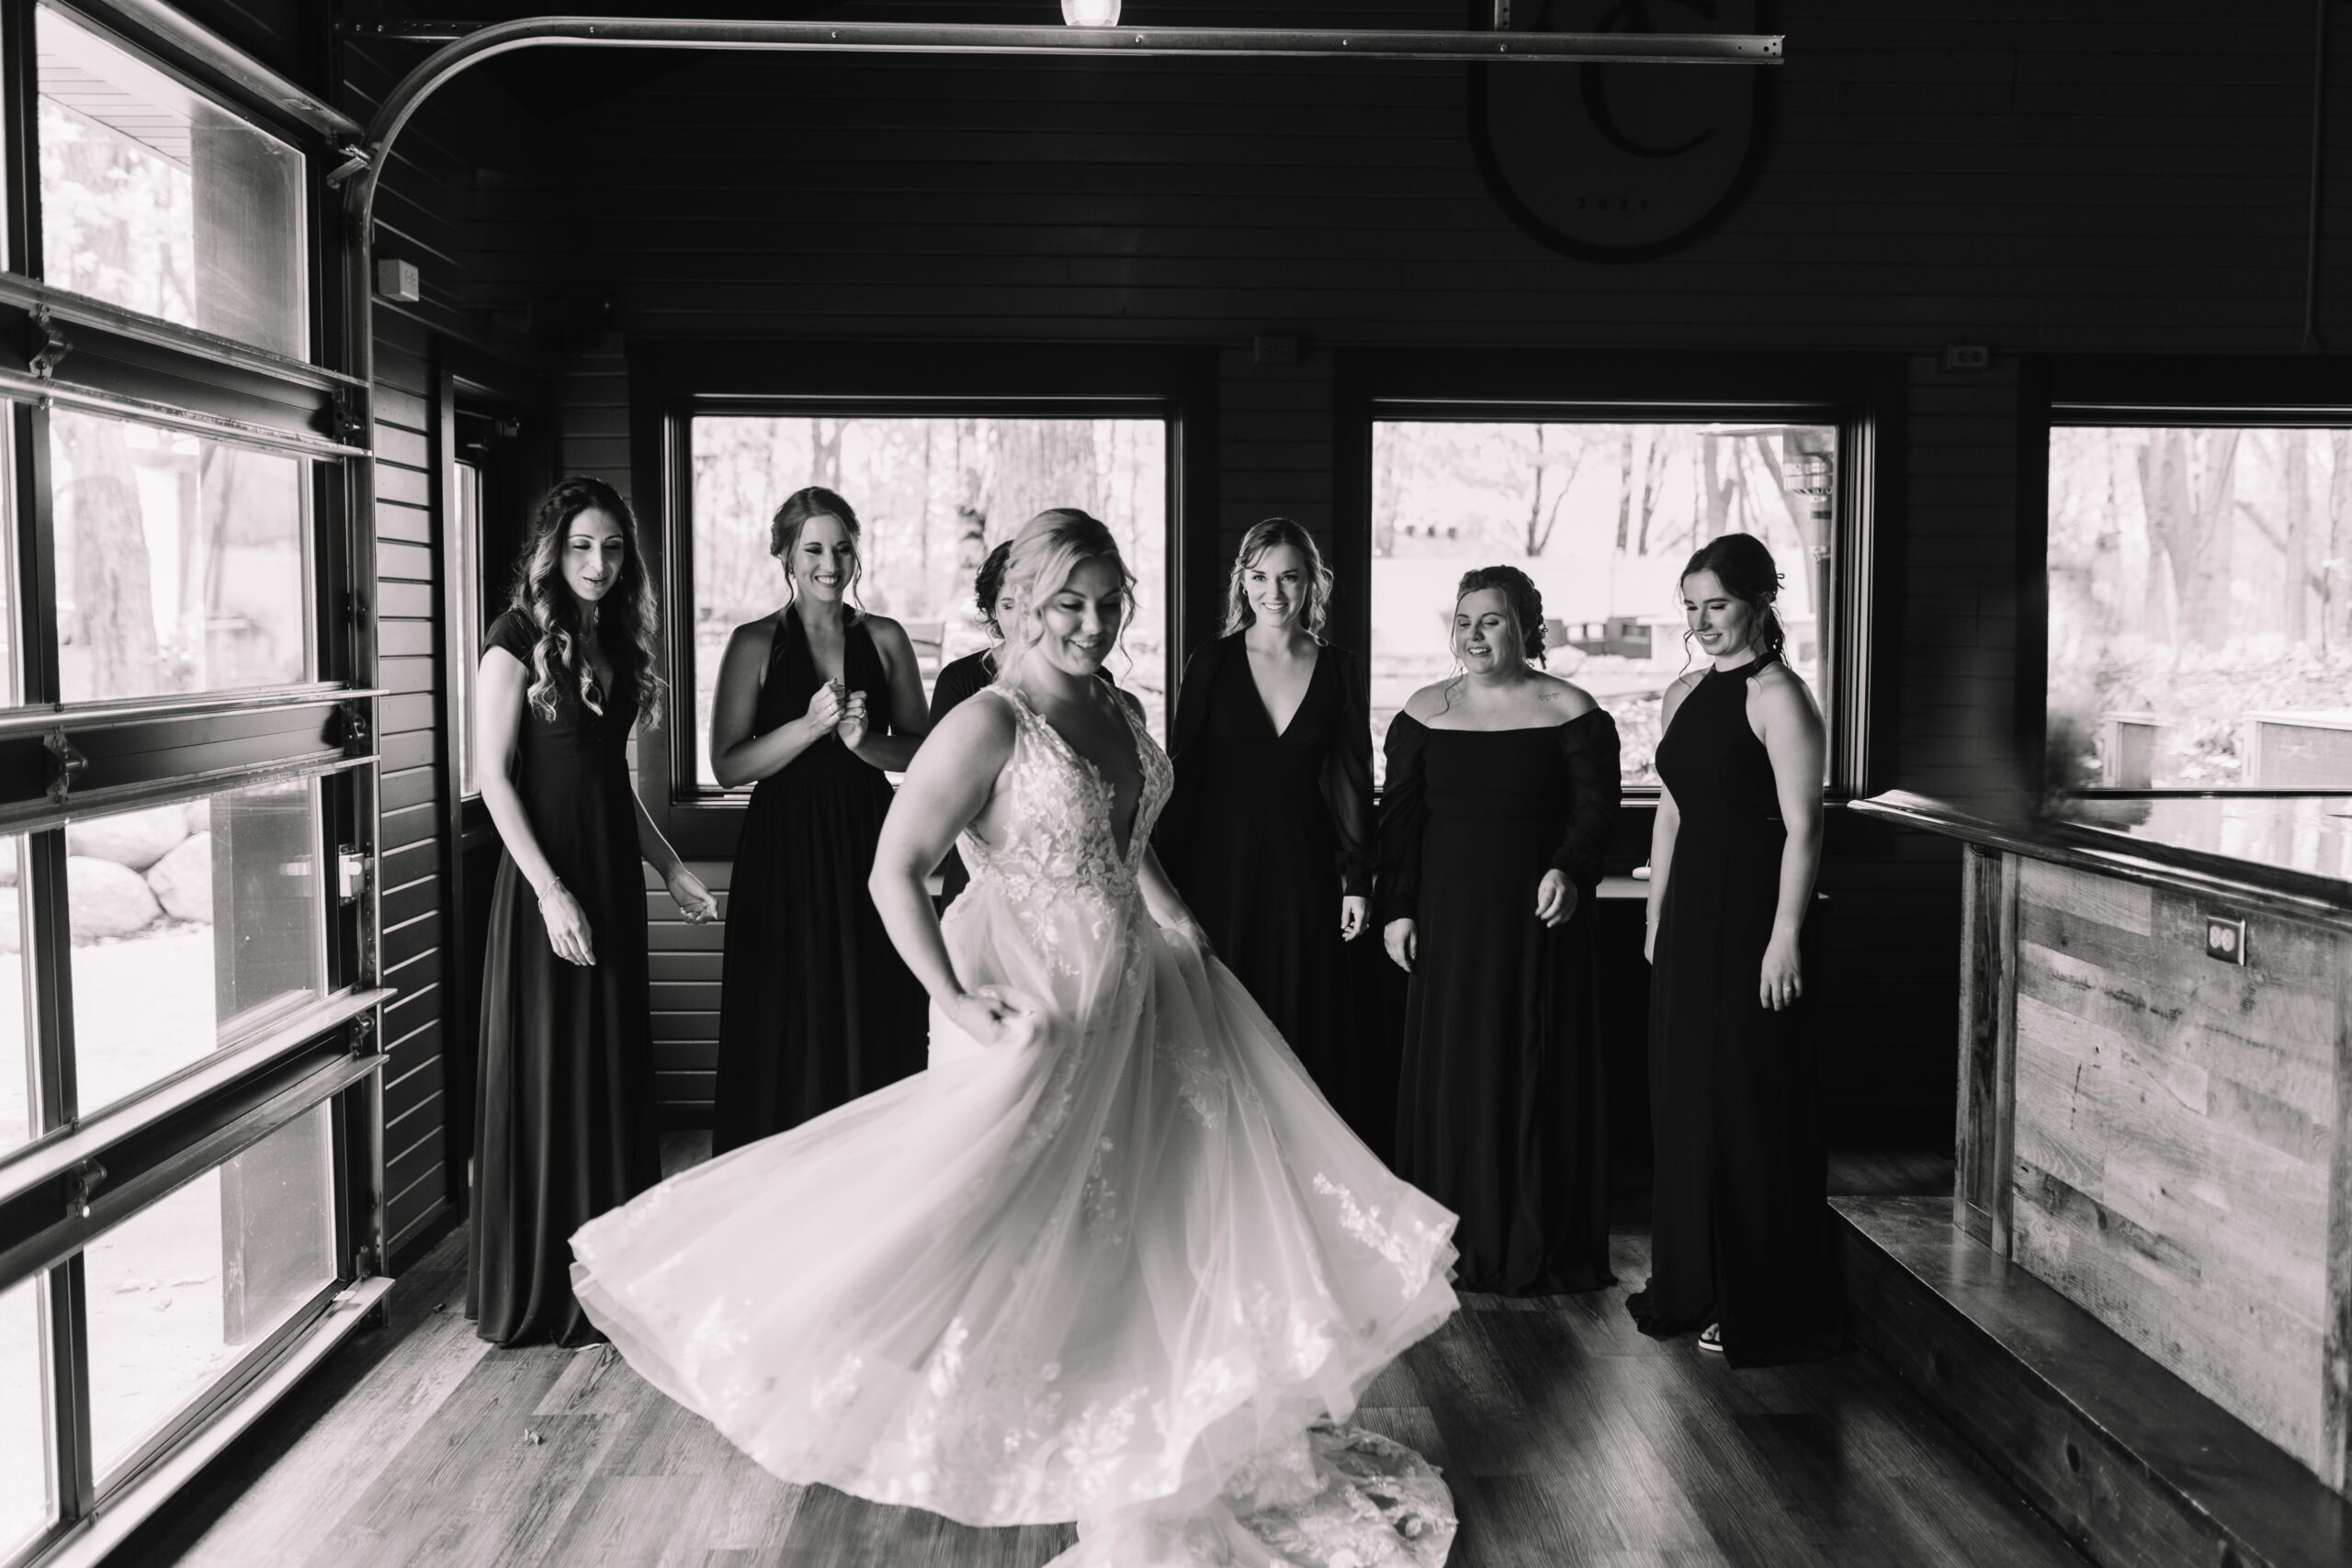 A bride twirling in her wedding dress in front of her bridesmaids showing off how beautiful she looks